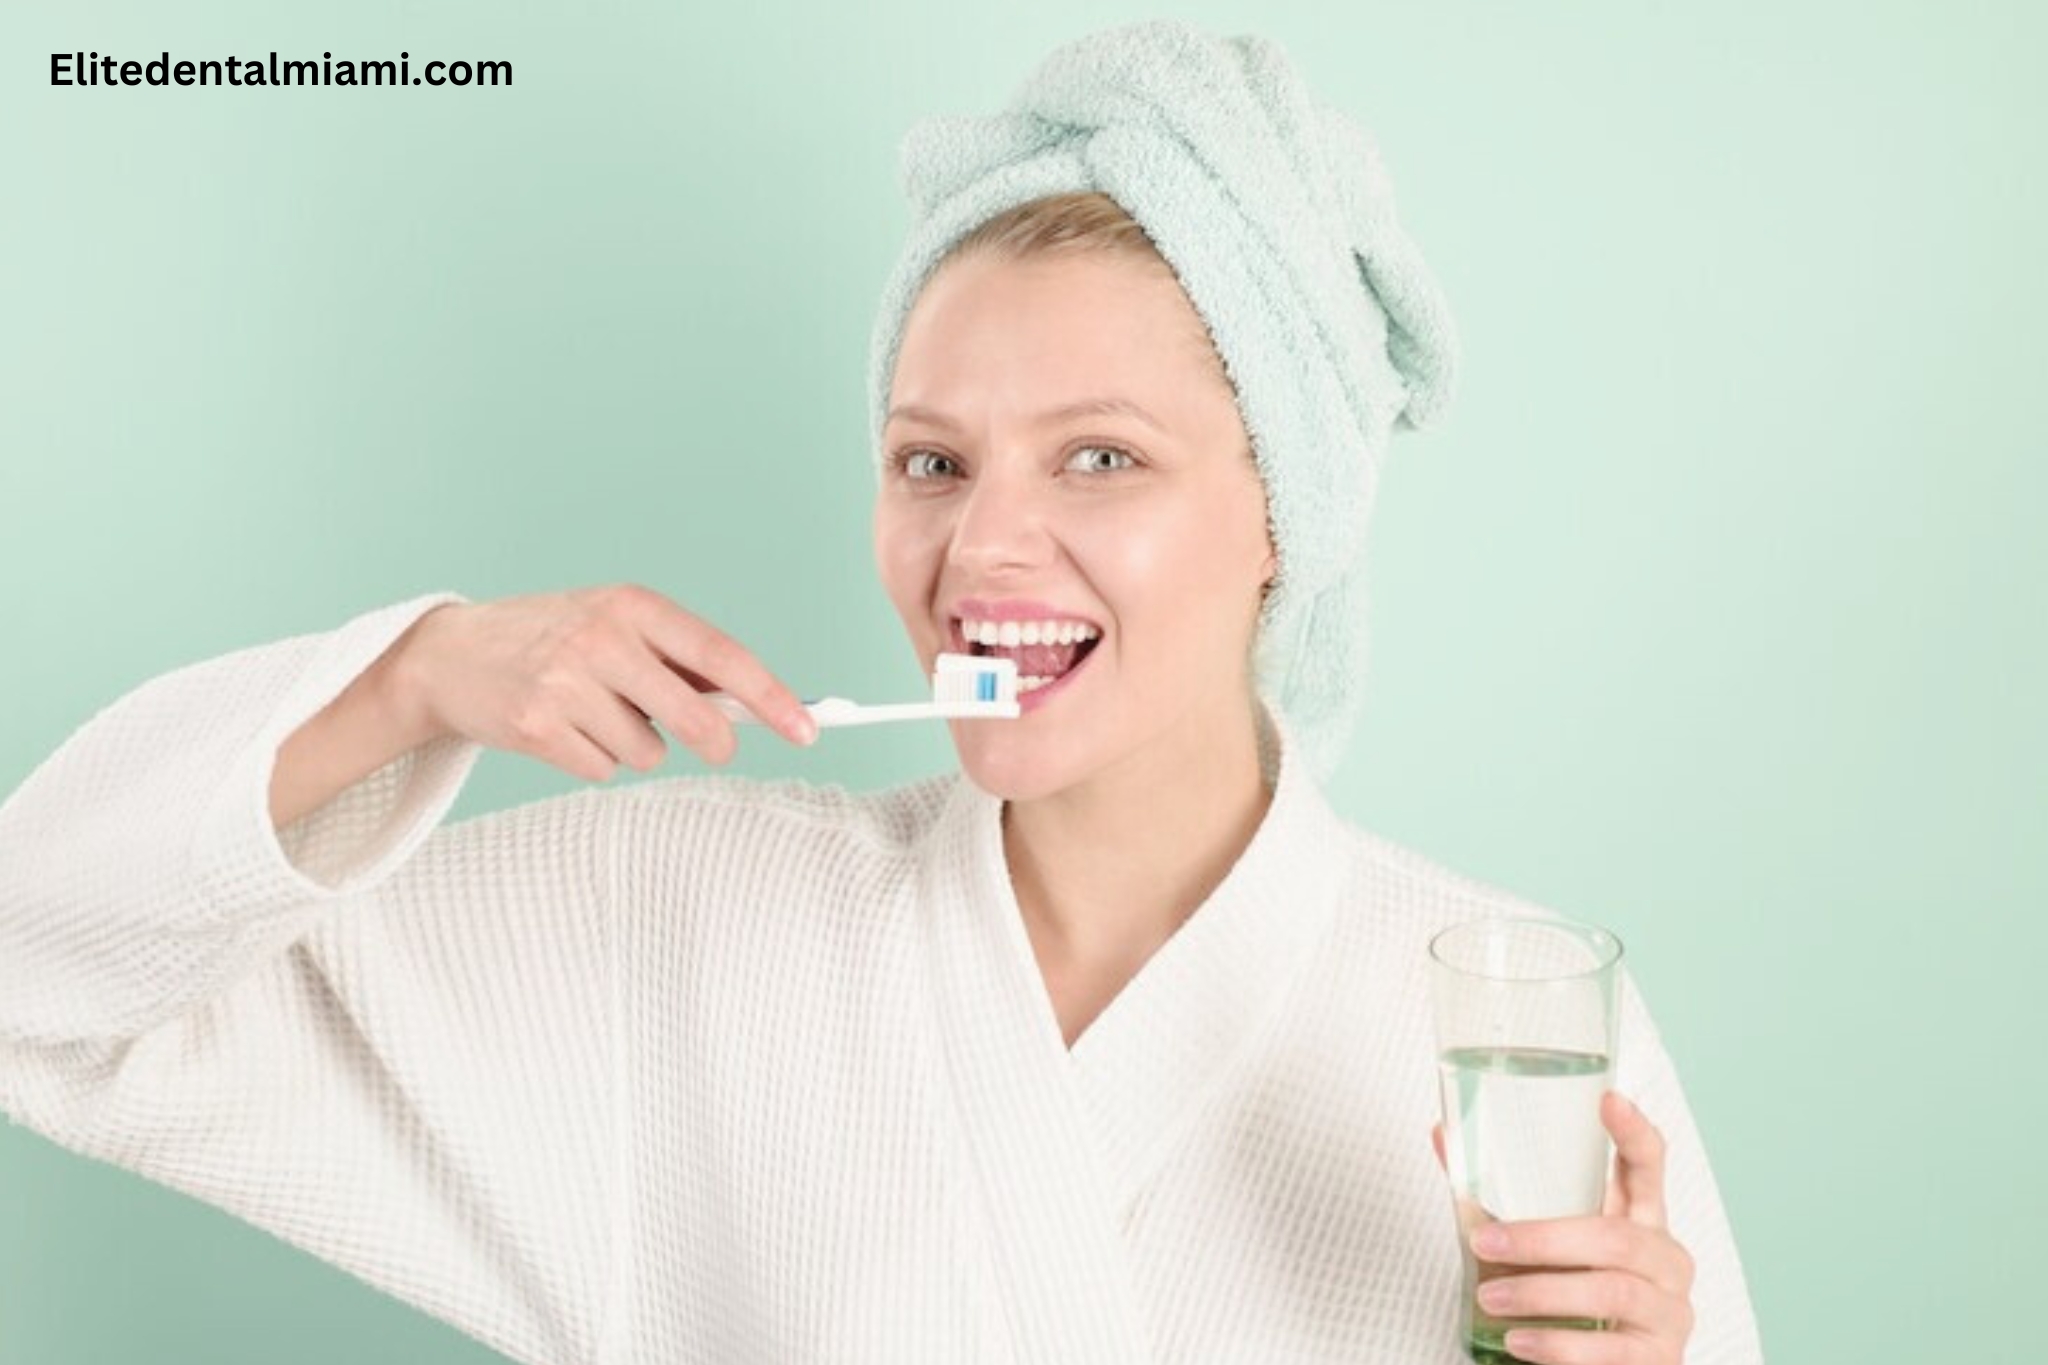 What Do I Brush My Teeth After Using Crest Whitening Strips